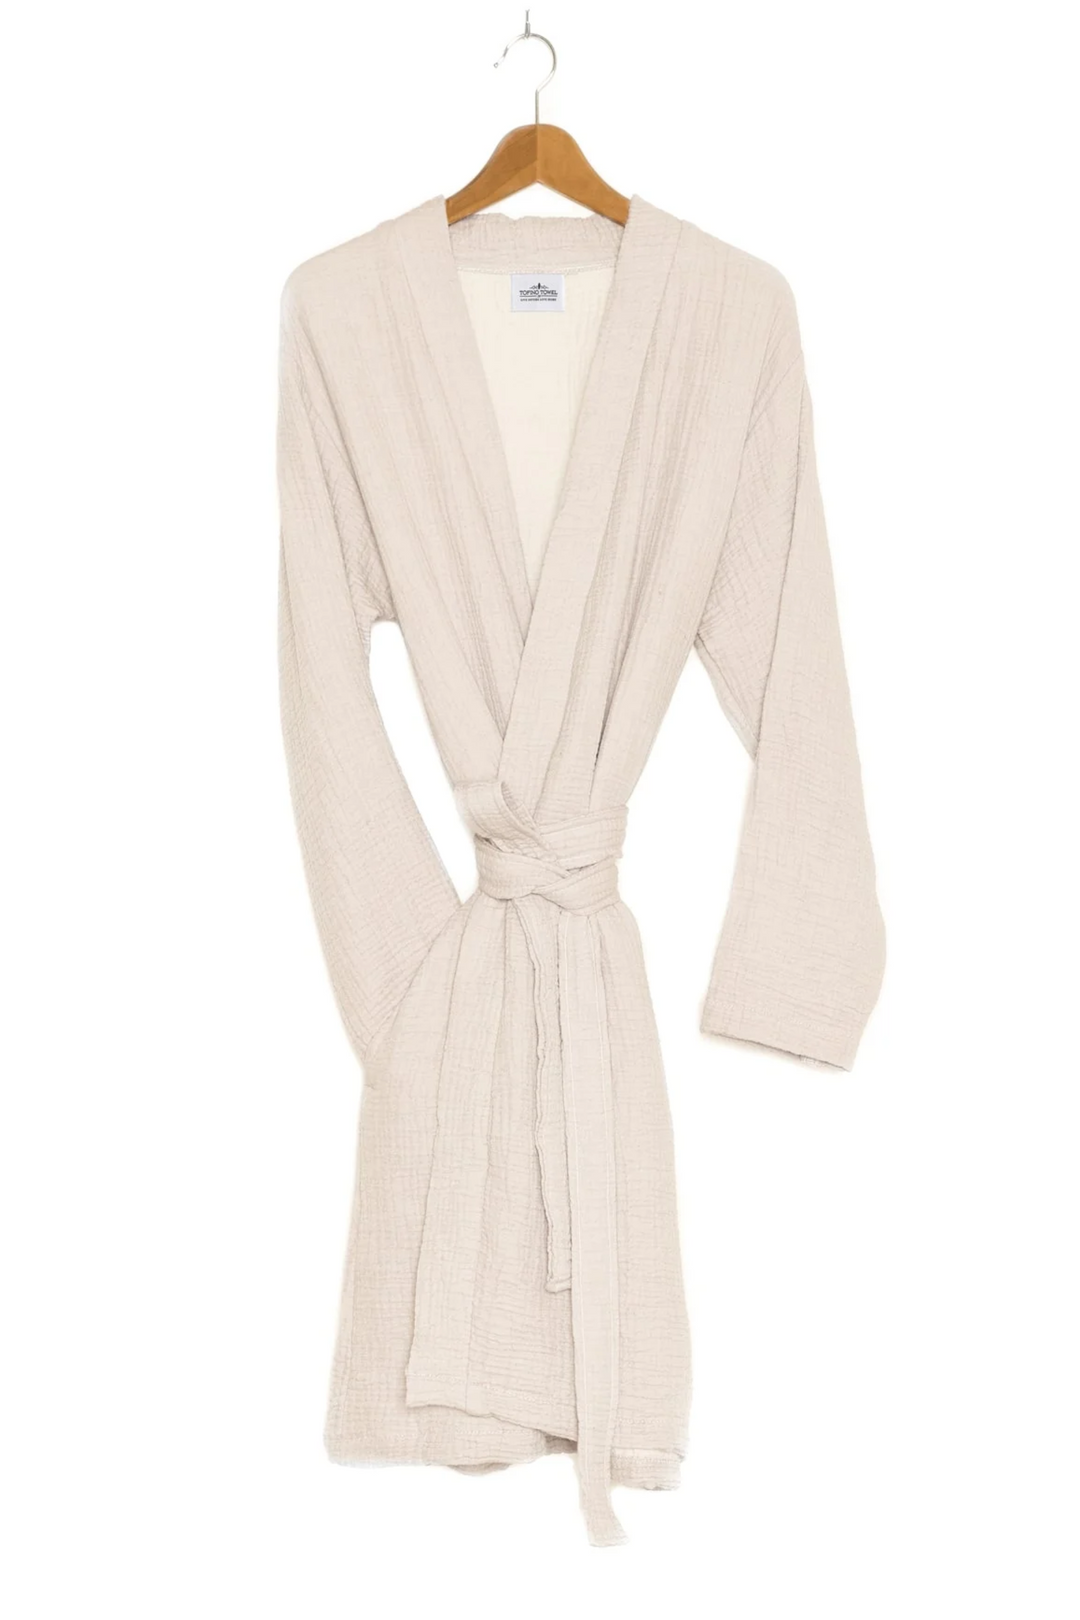 THE QUEST | Muslin Robe